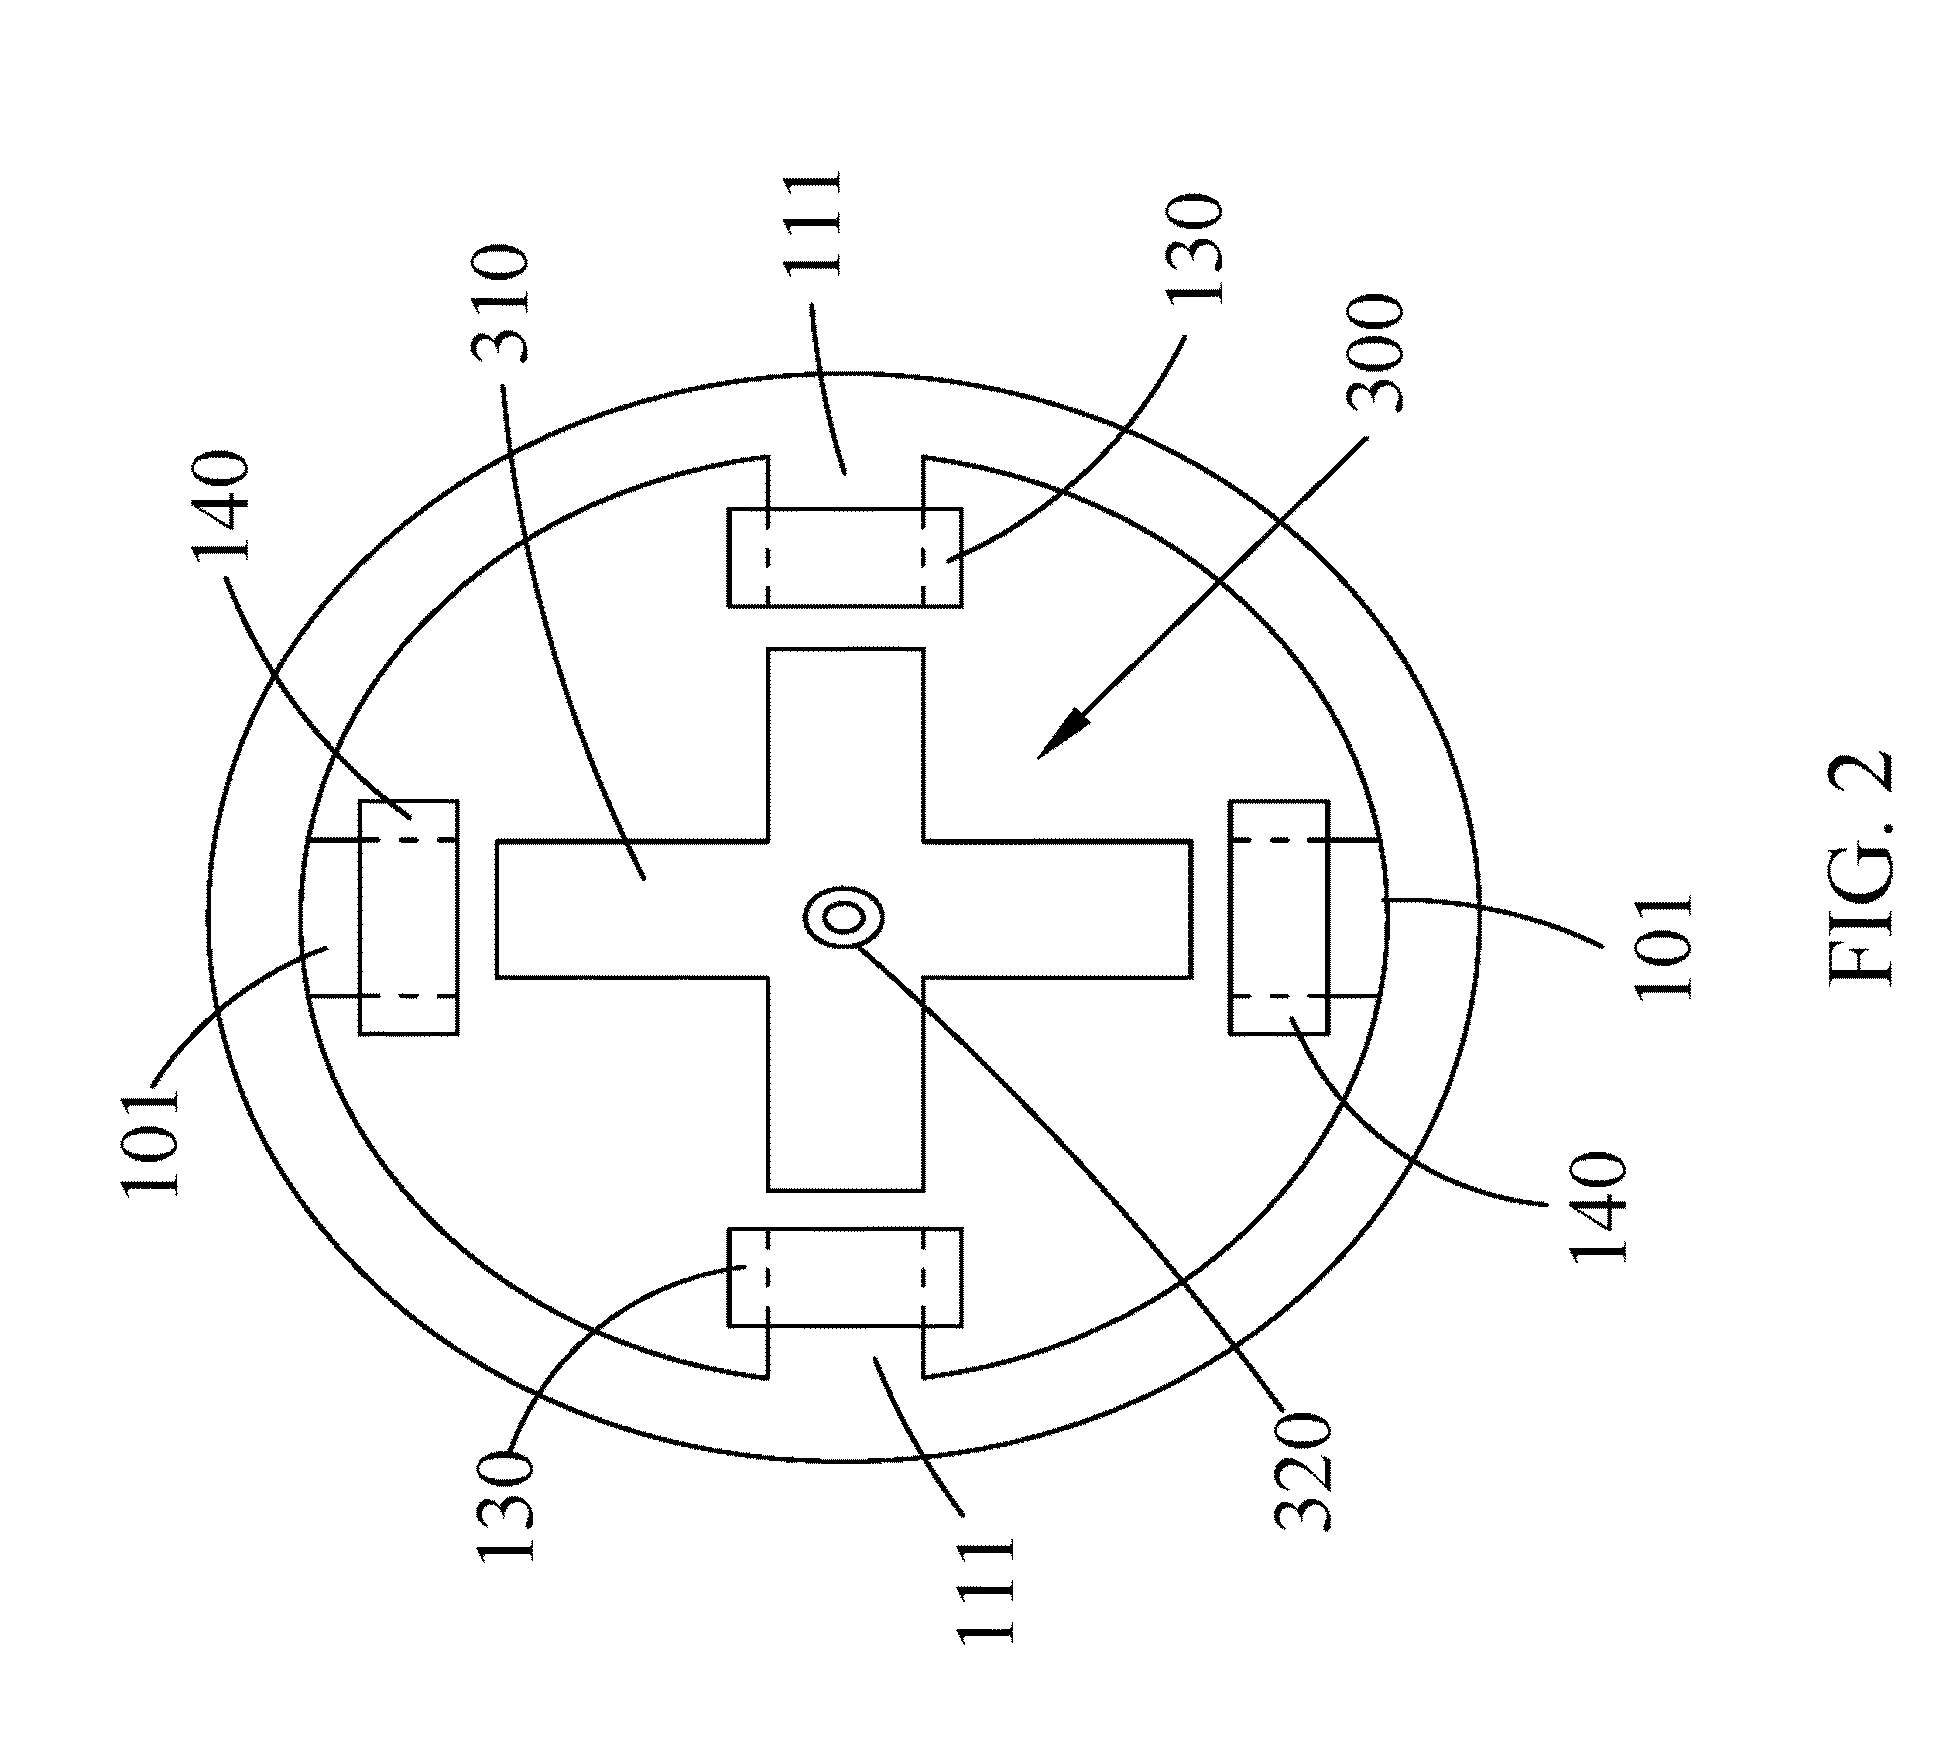 Salient-pole type linear motor and reciprocal double piston compressor with salient-pole type linear motor